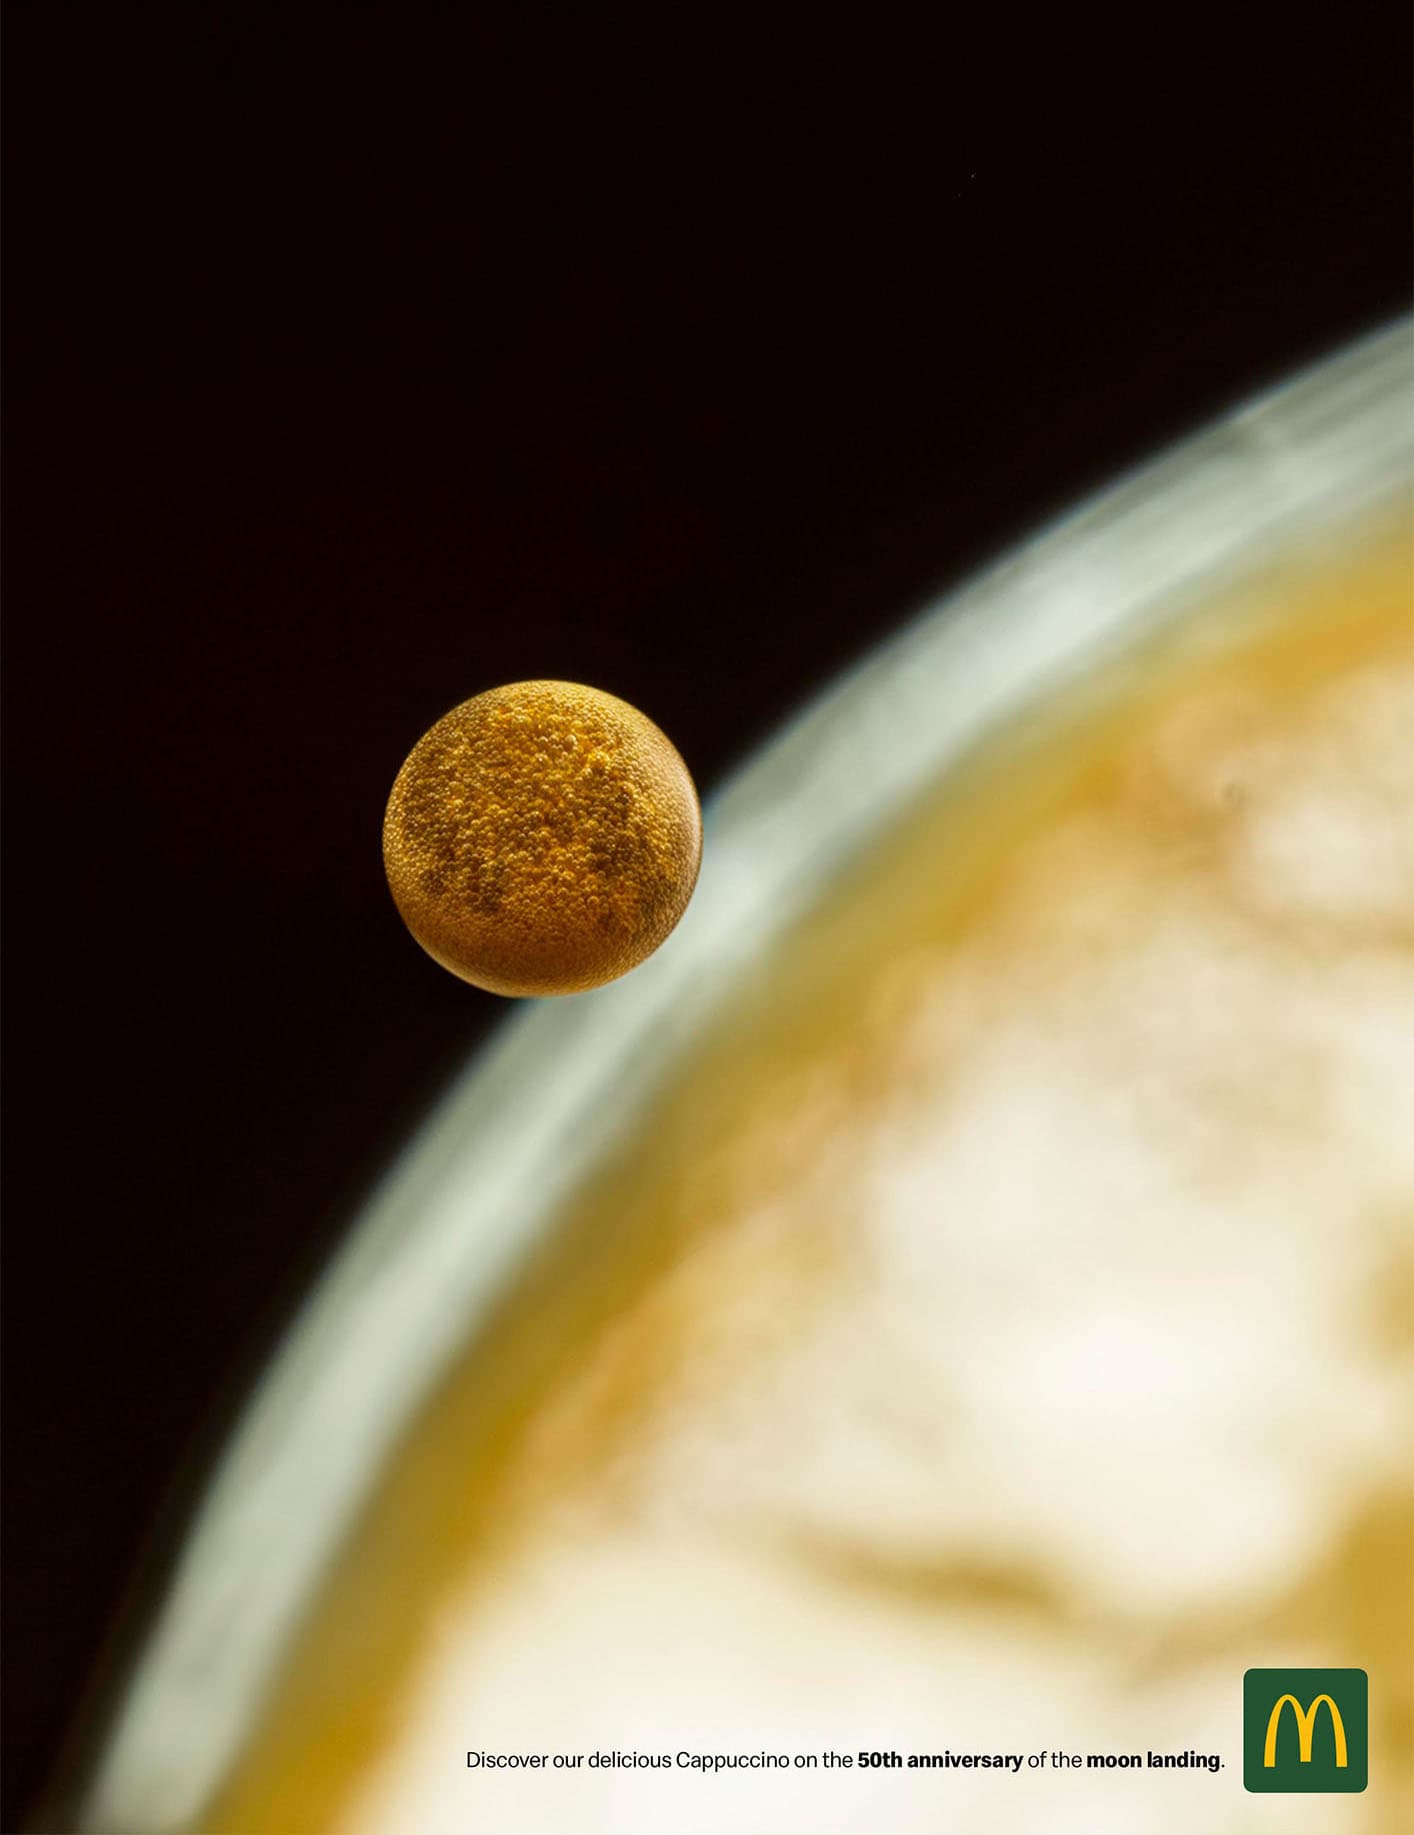 A close up of a Cappuccino mimicking the image of the moon and the earth taken on the Apollo 11 mission. This Campaign celebrates the 50th Anniversary of the landing on the Moon